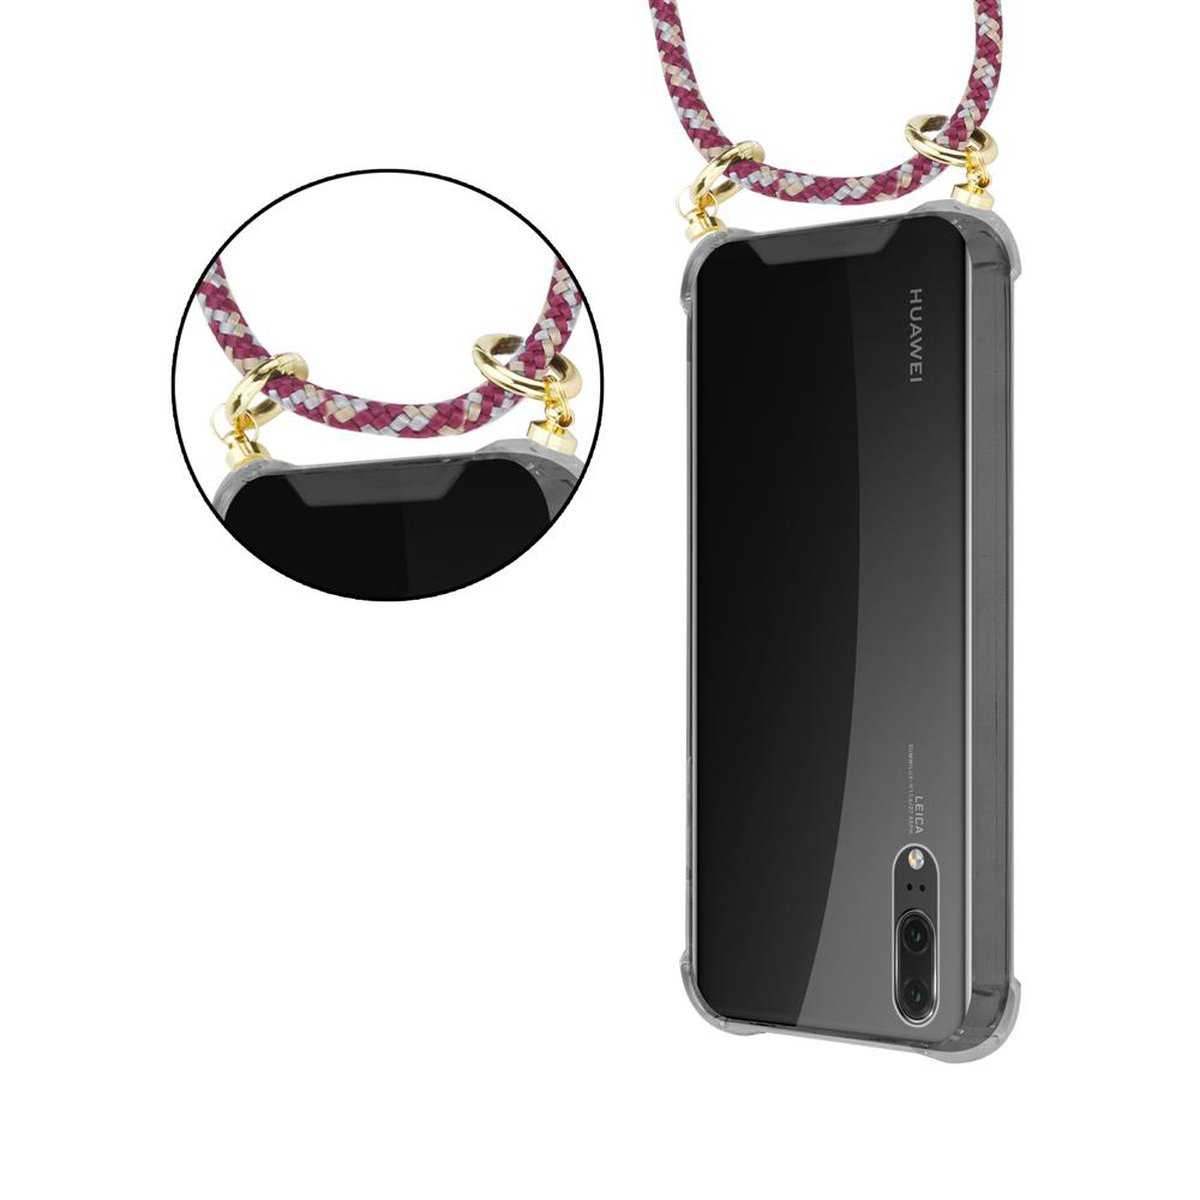 Ringen, ROT Kette und Hülle, Backcover, Band GELB mit CADORABO Huawei, P20, Handy Gold abnehmbarer Kordel WEIß